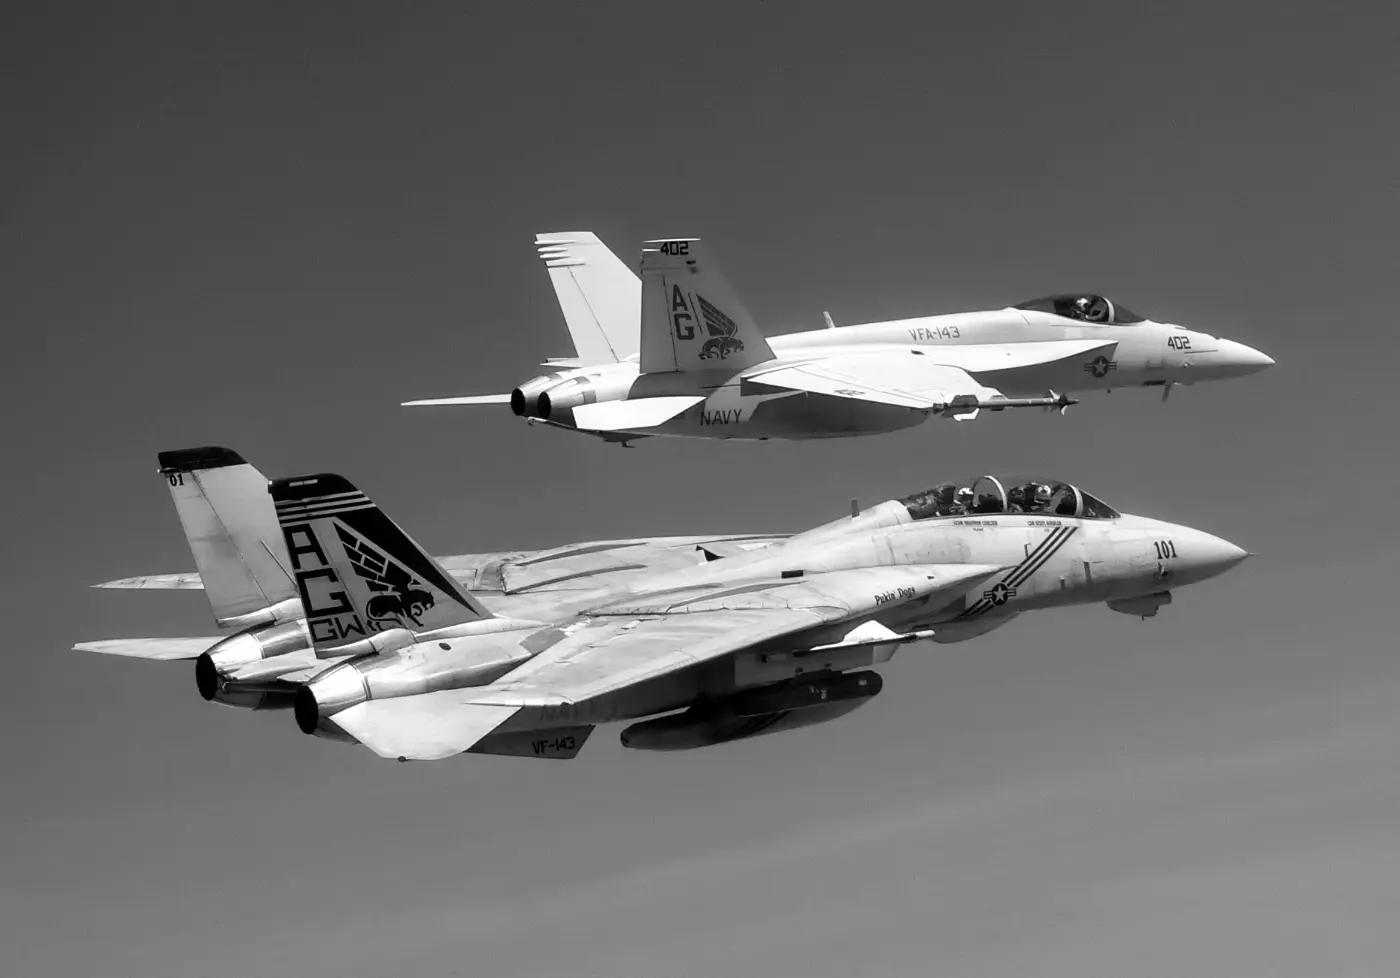 Read if the F-14 Tomcat is still in service.